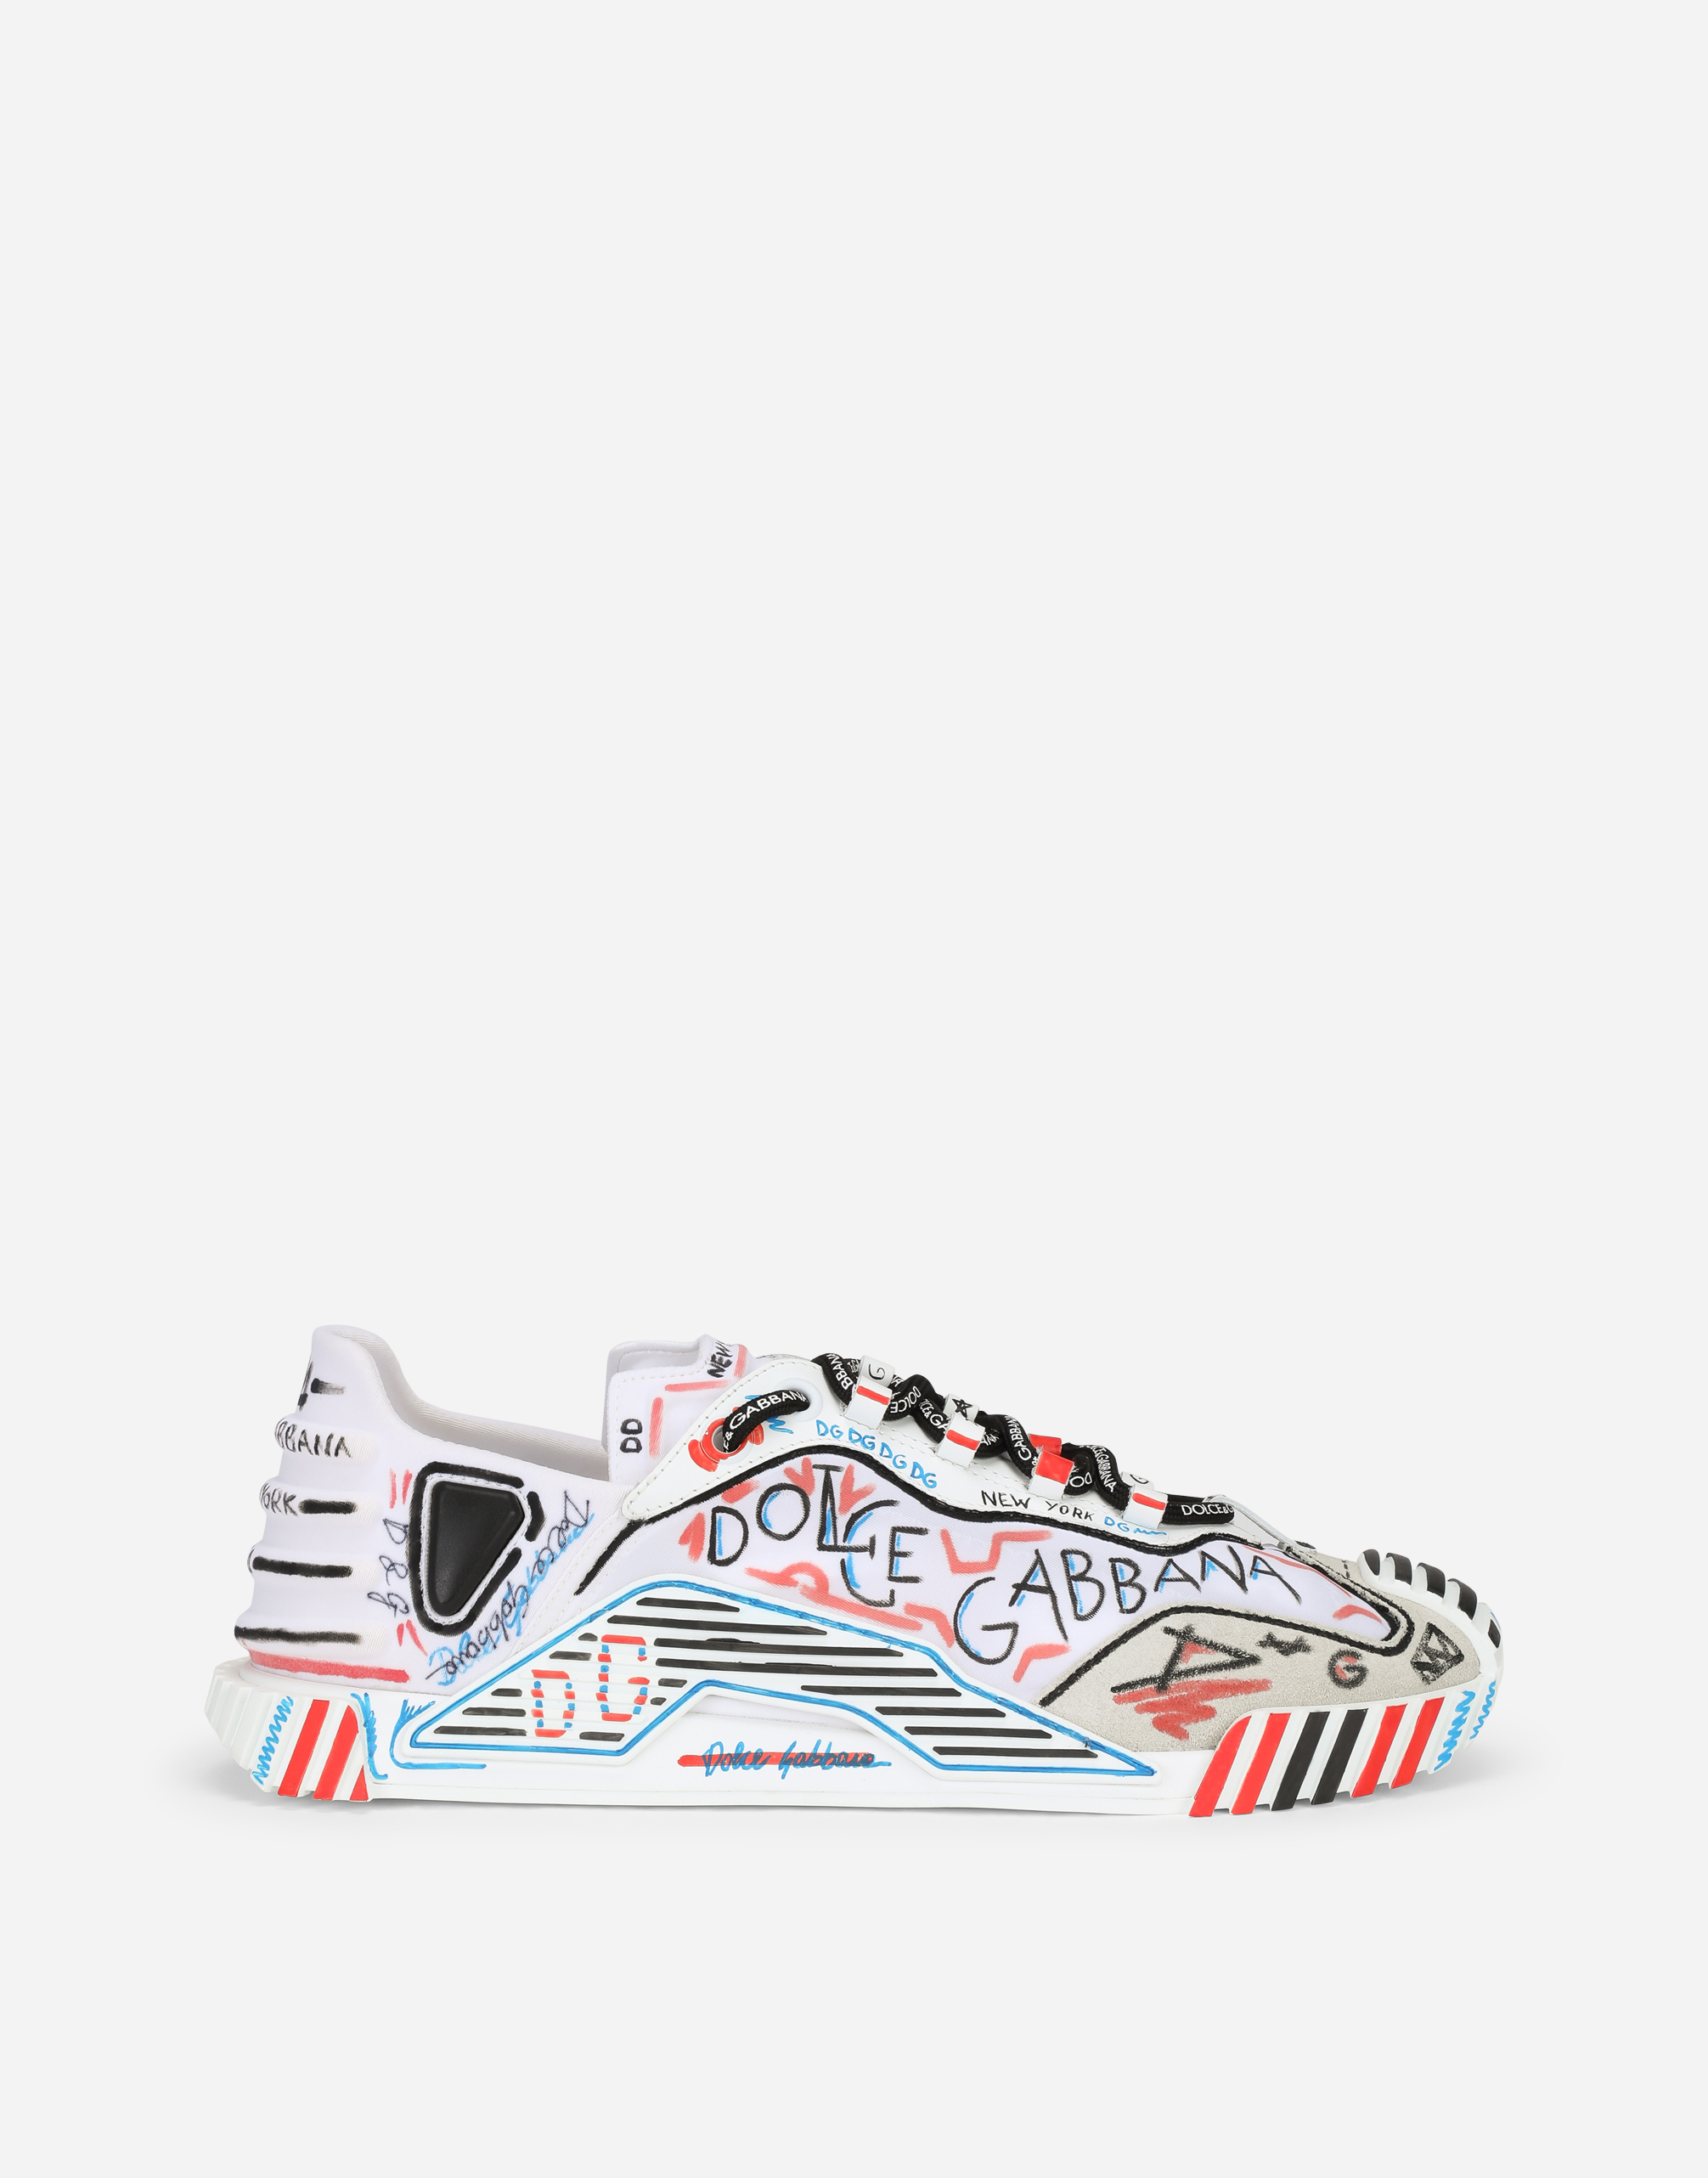 Mixed-materials Miami NS1 slip-on sneakers in New York